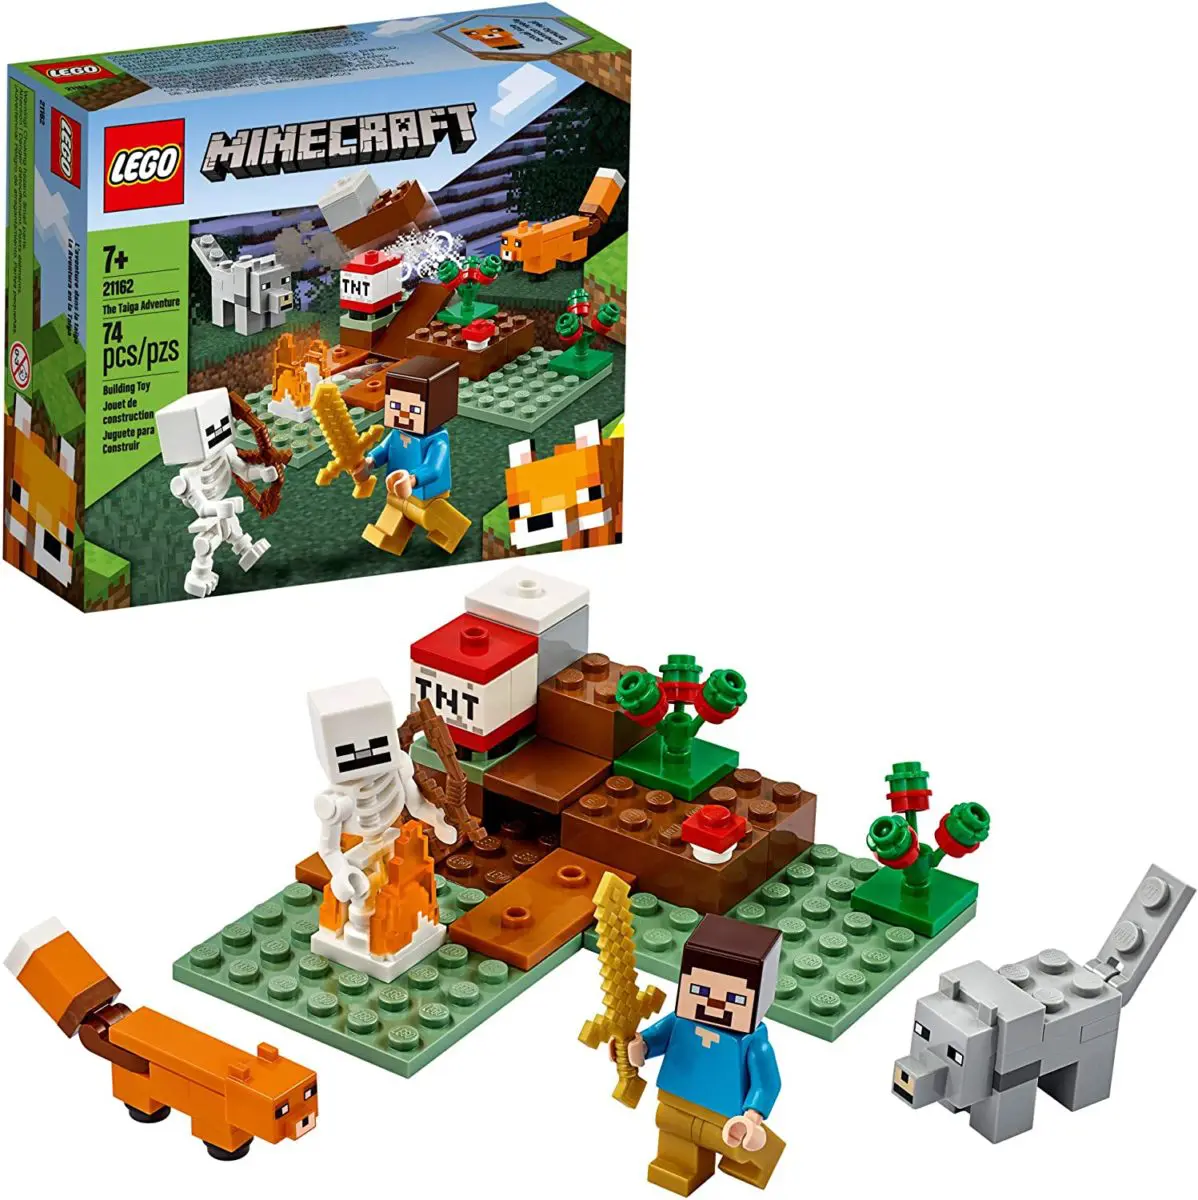 LEGO Minecraft The Taiga Adventure - Top Toys and Gifts for Eight Year Old Boys 1